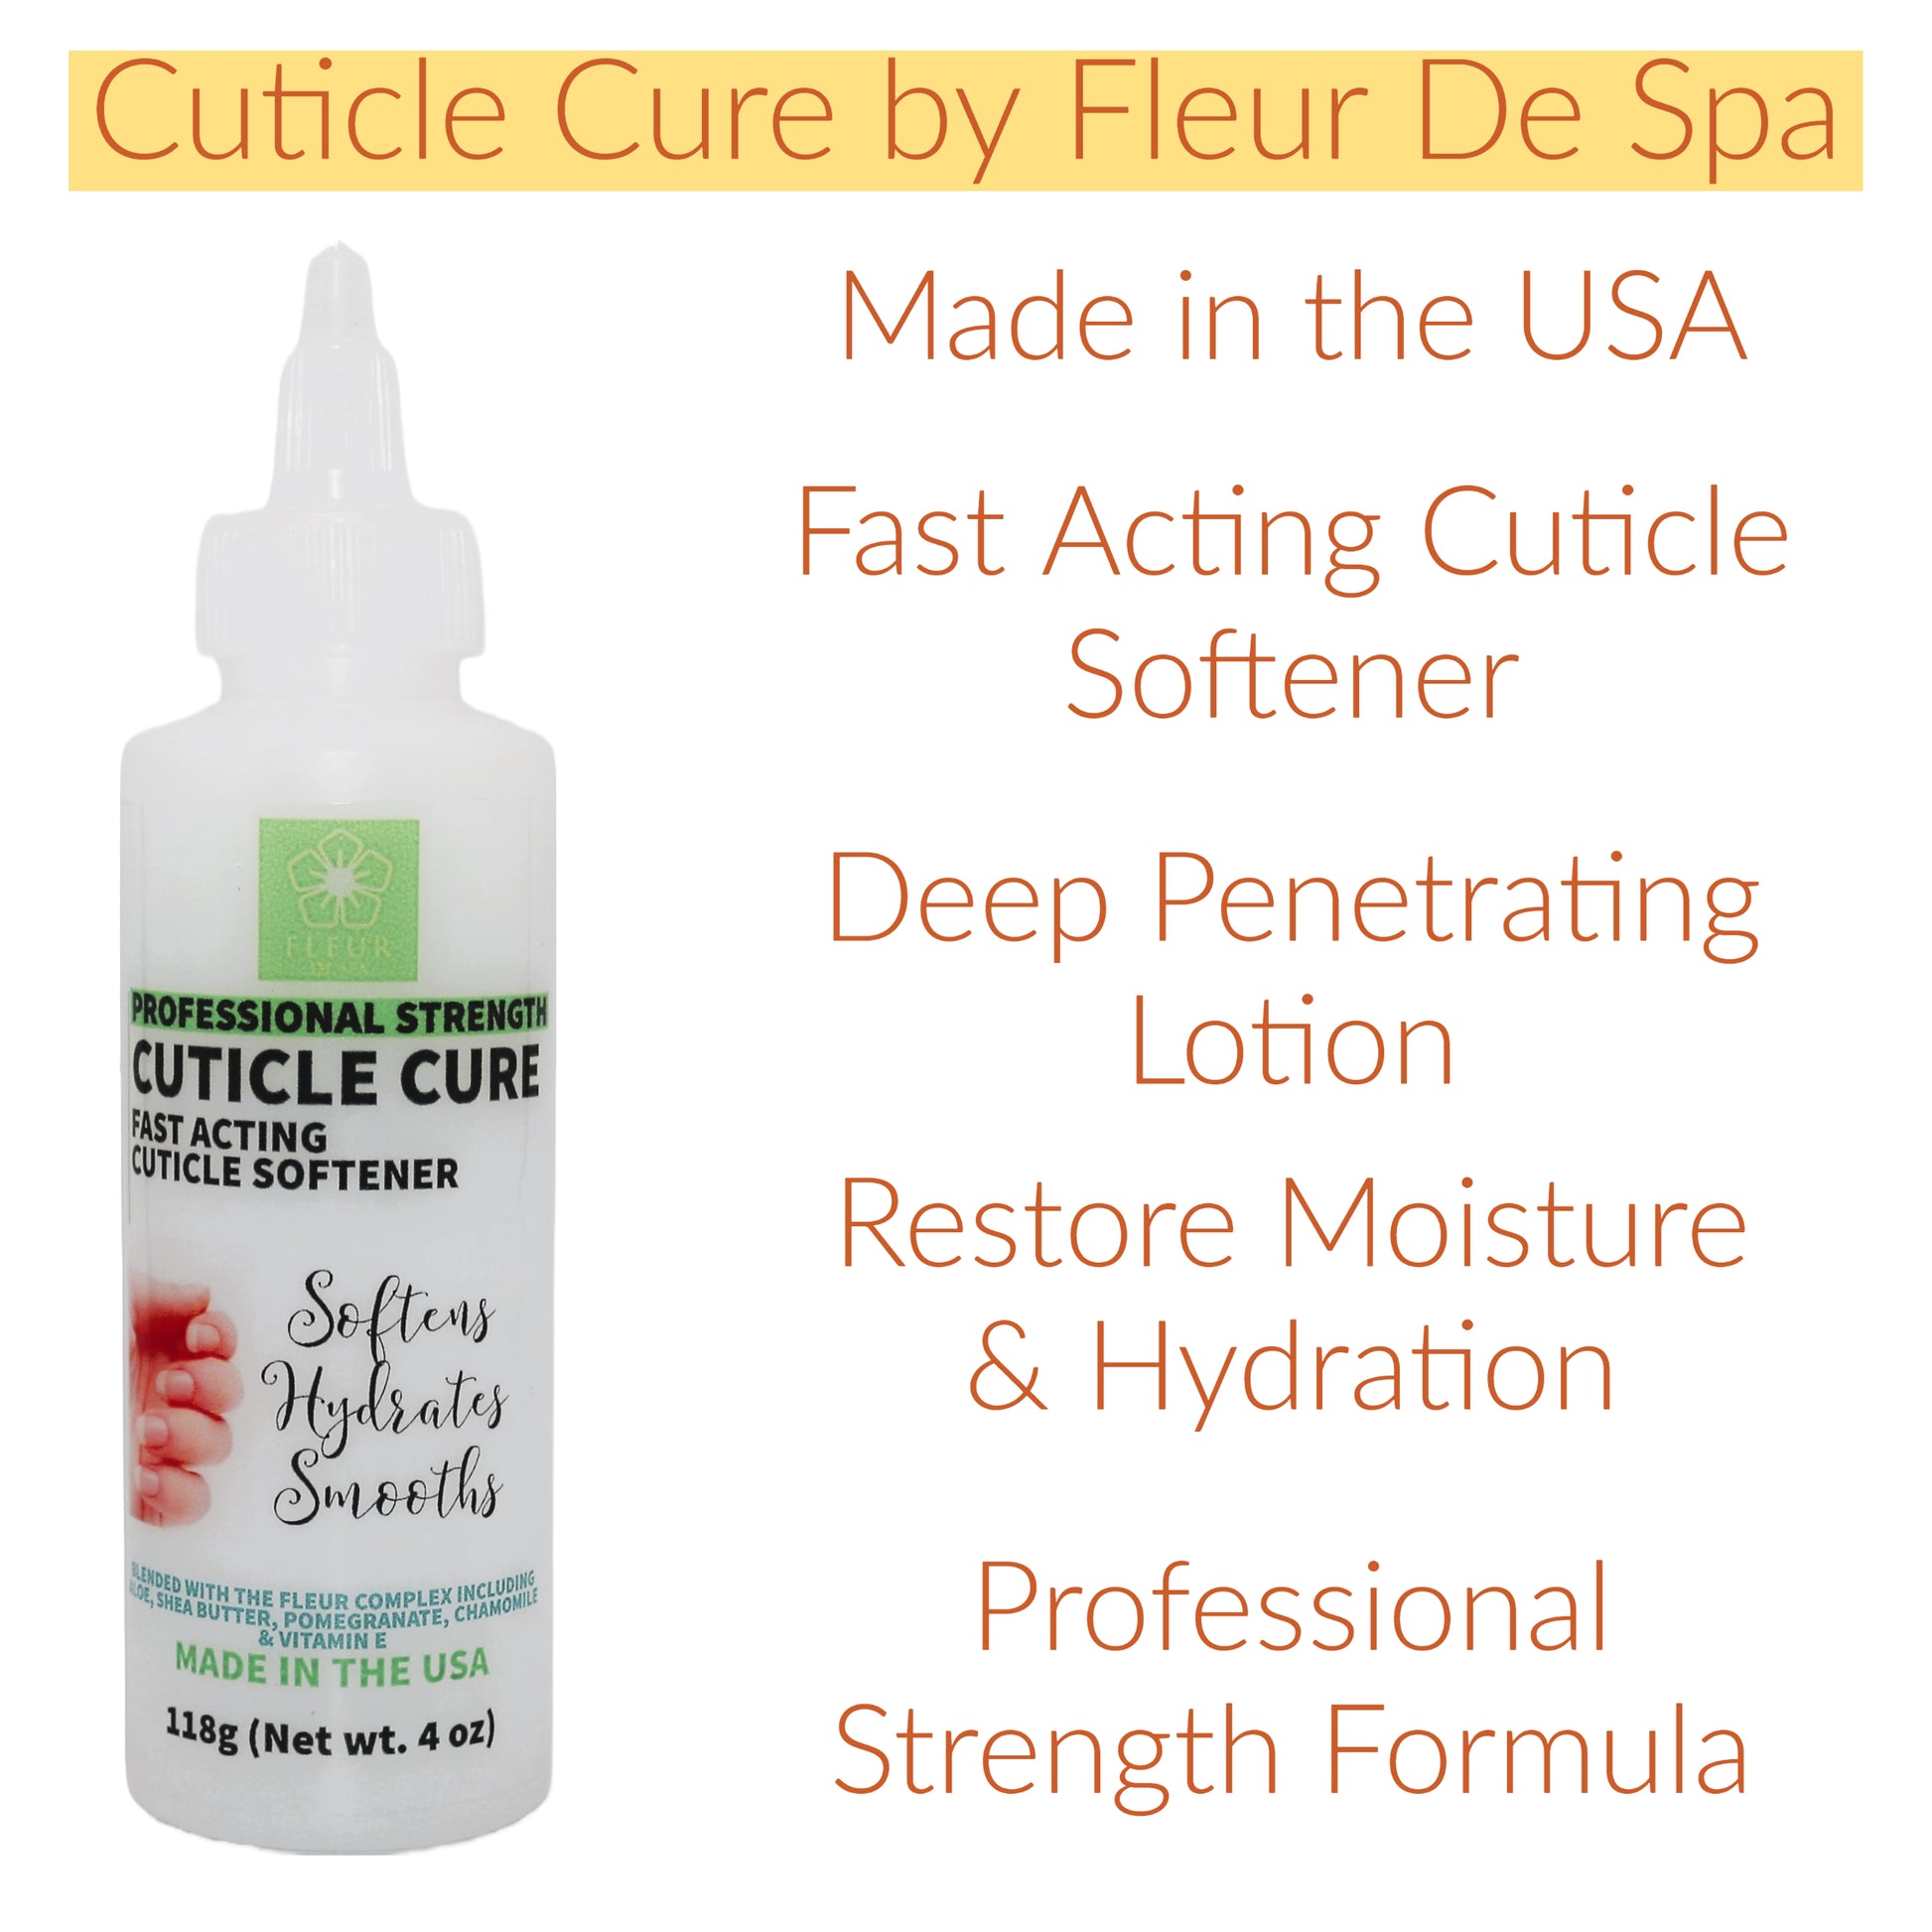 Cuticle softener by fleur de spa cuticle remover for manicure pedicure at home spa treatment diy nail health skin care made in usa product lotion to hydrate and moisturize nail bed professional strength formula